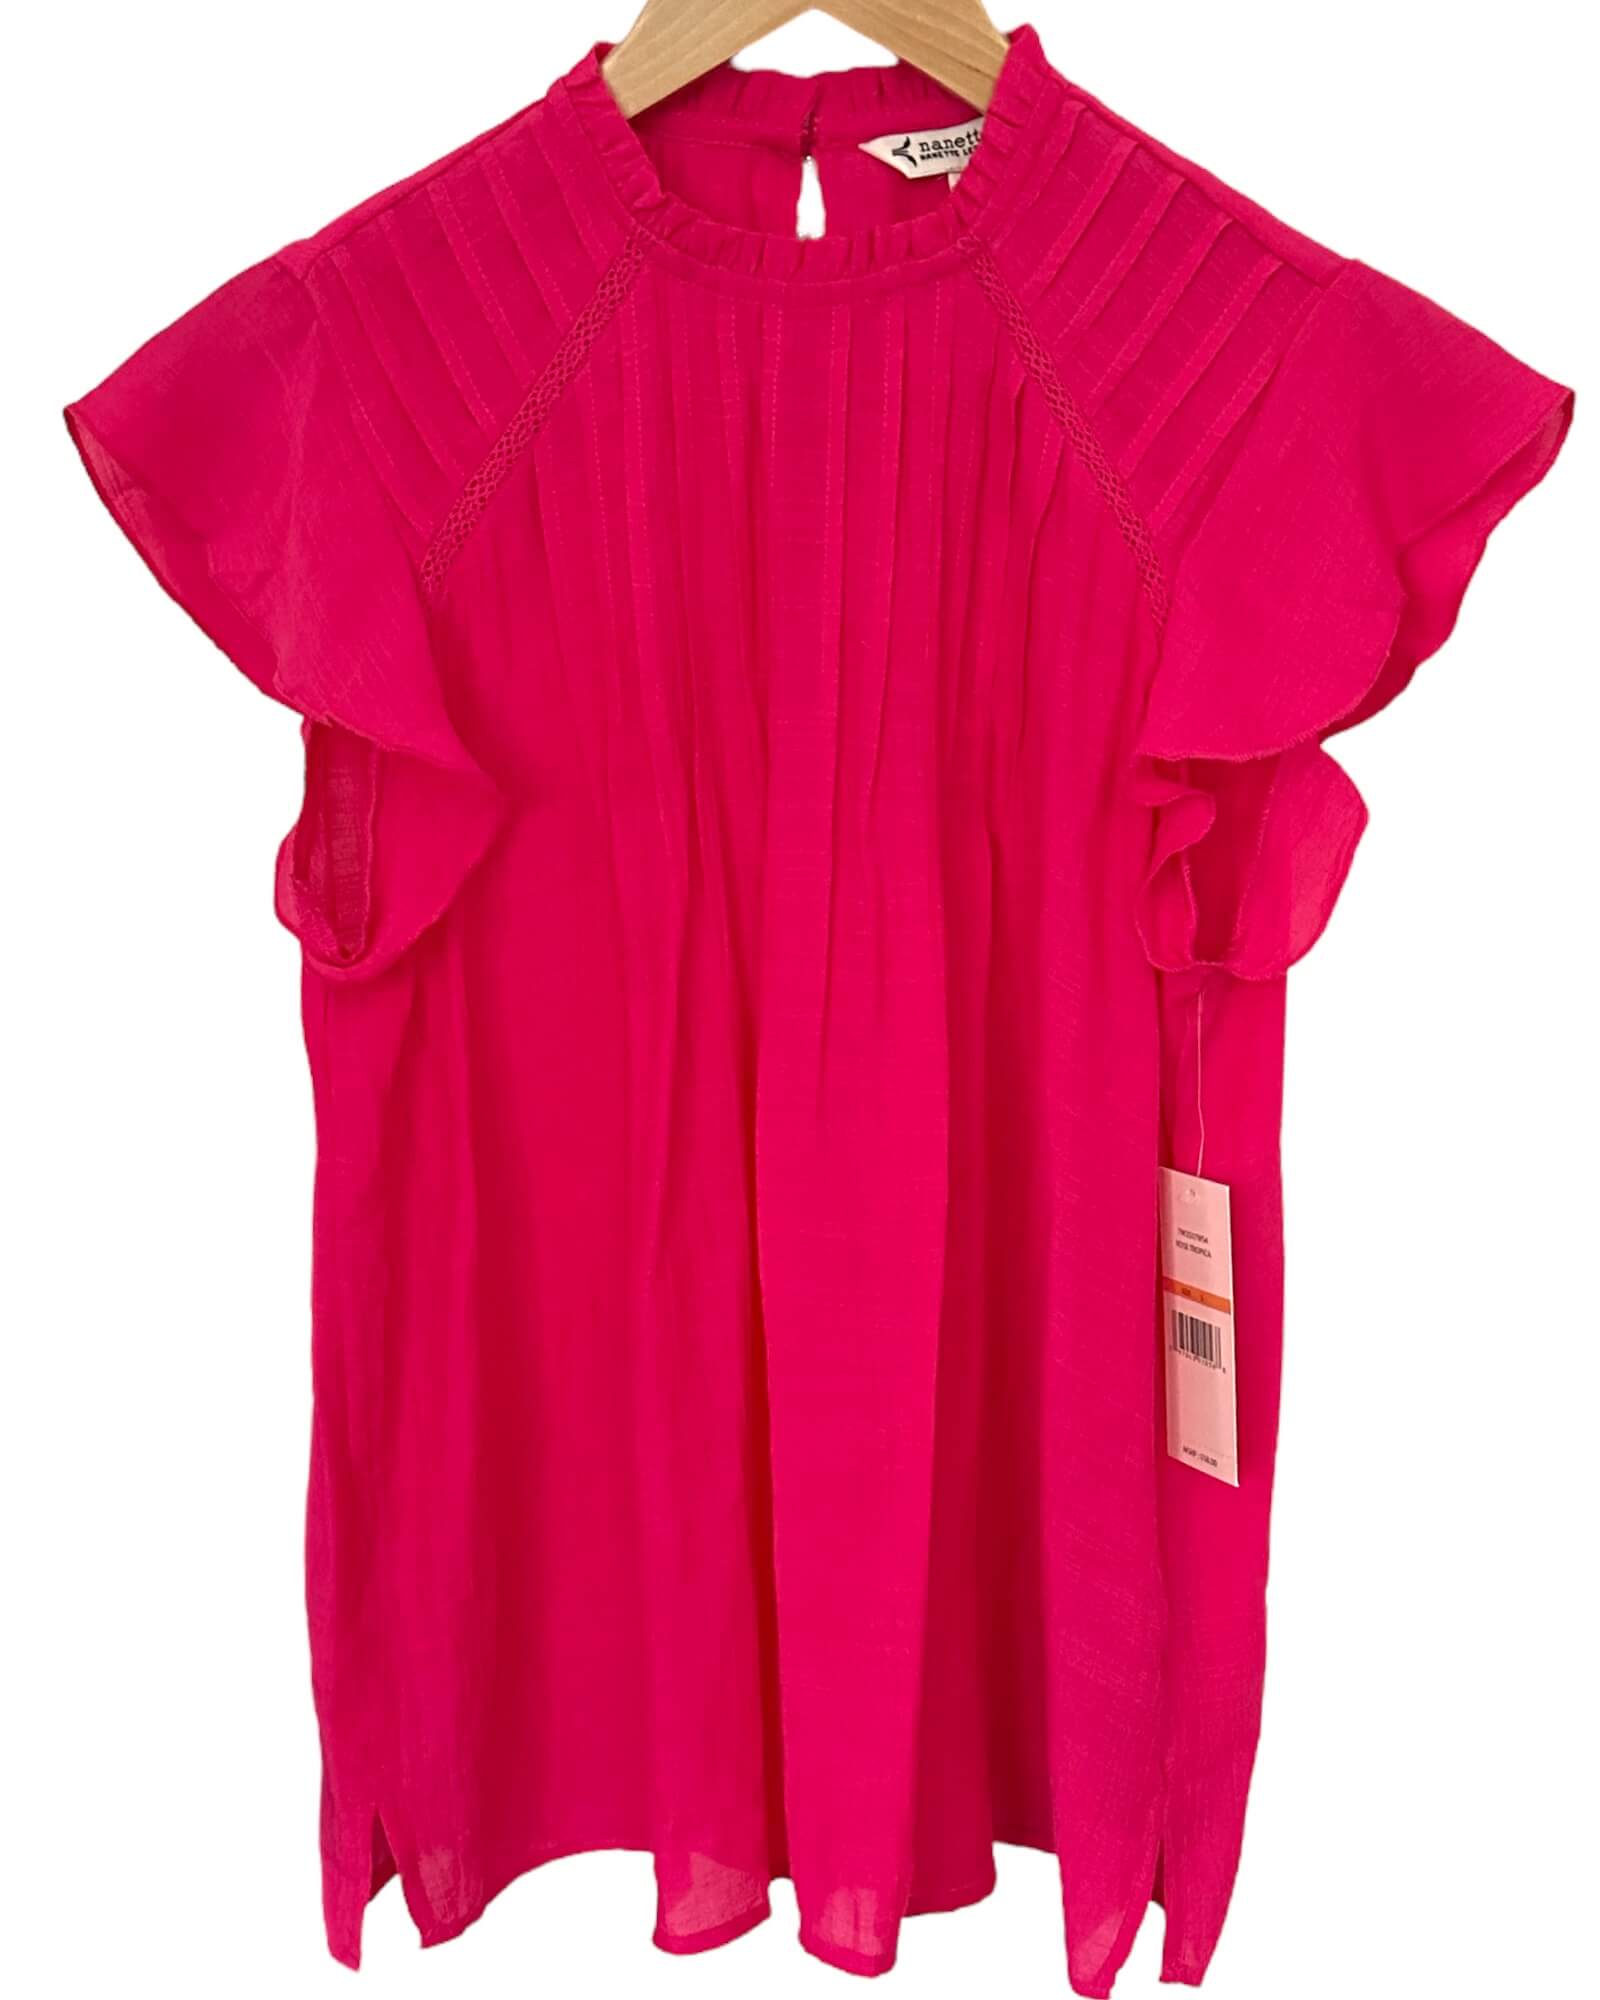 Bright Spring NANETTE LEPORE radiant pink pin-tuck ruffle sleeve blouse 